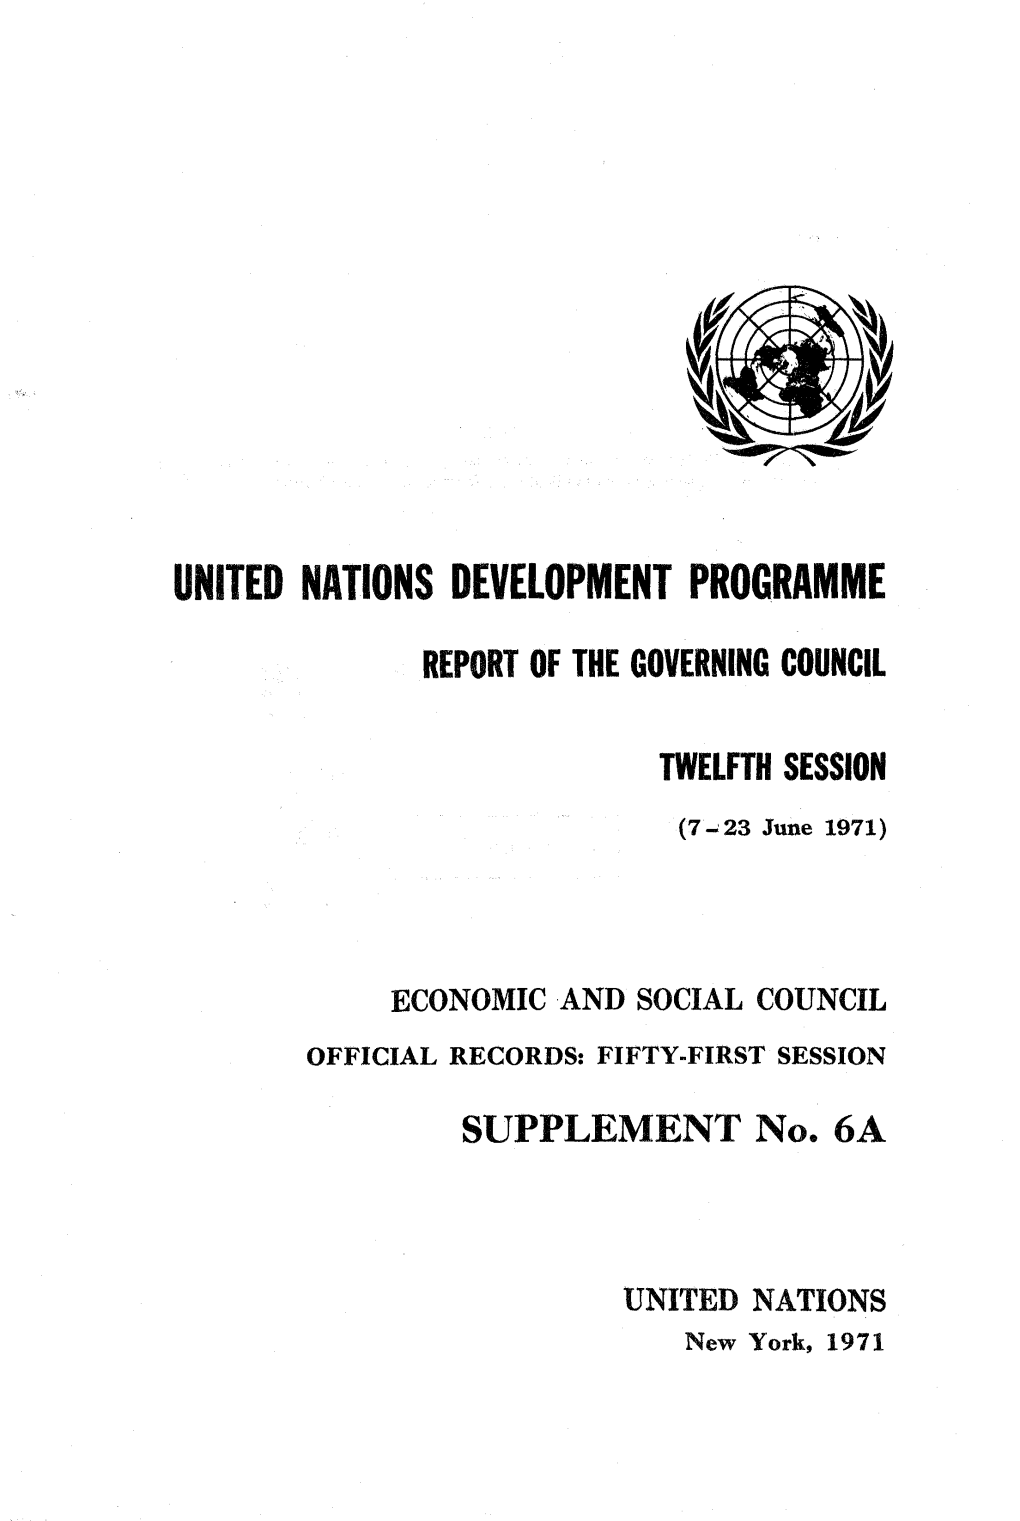 UNDP Report of the Governing Council 12Th Session 7-23 June 1971 Economic and Social Council Official Records 51St Session Suppl